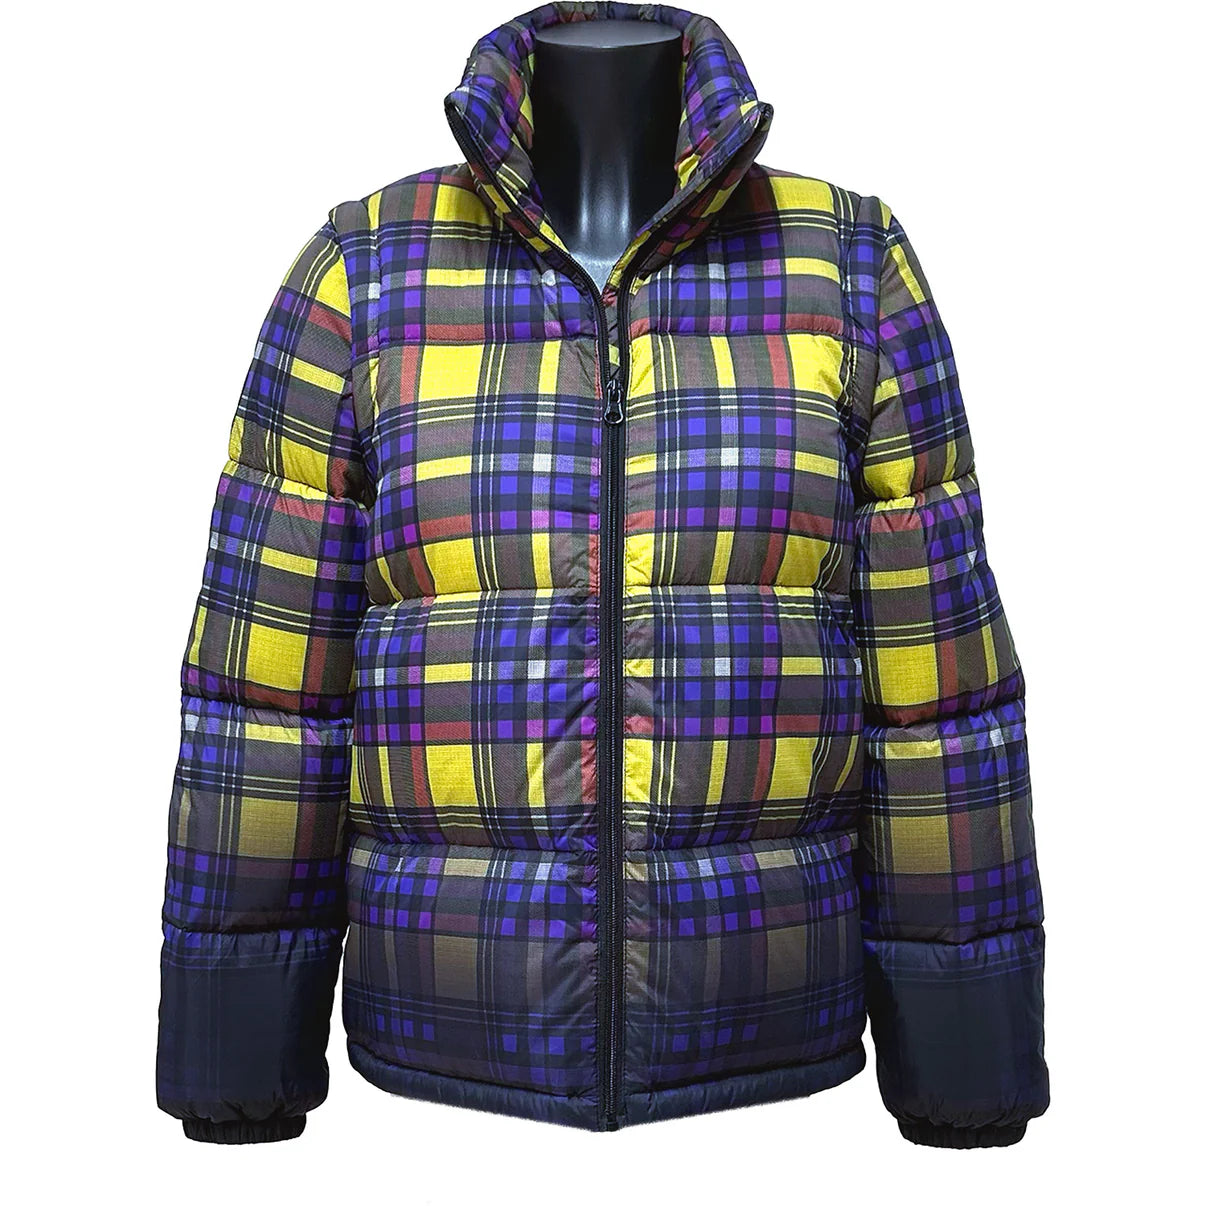 SALE downjacket tartan with removable arms yelllow/purple